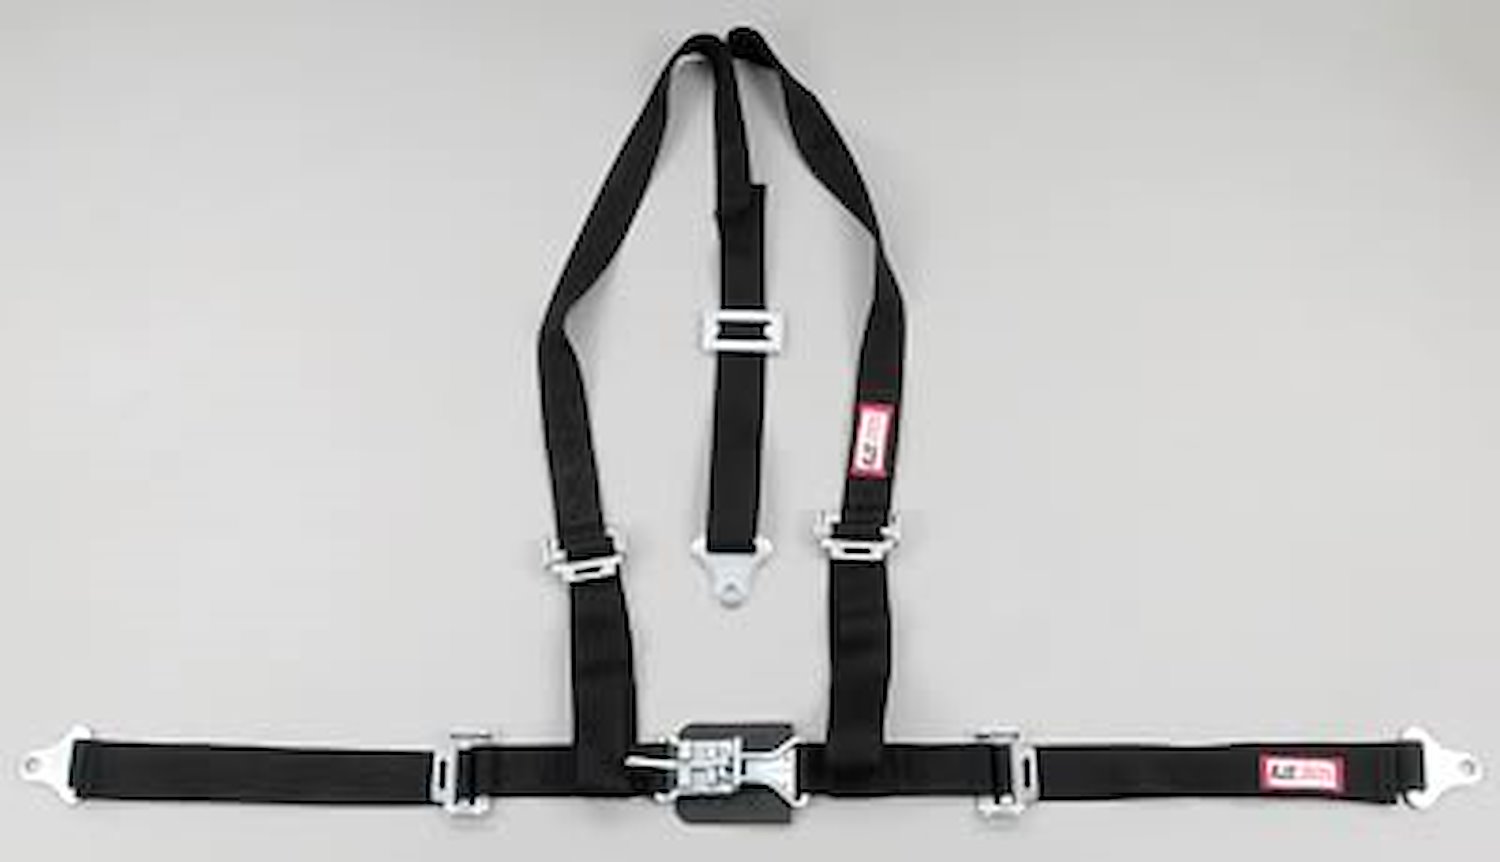 NON-SFI L&L HARNESS 2 PULL DOWN Lap Belt SNAP SEWN IN 2 S.H. INDIVIDUAL FLOOR Mount w/STERNUM STRAP WRAP/BOLT HOT PINK